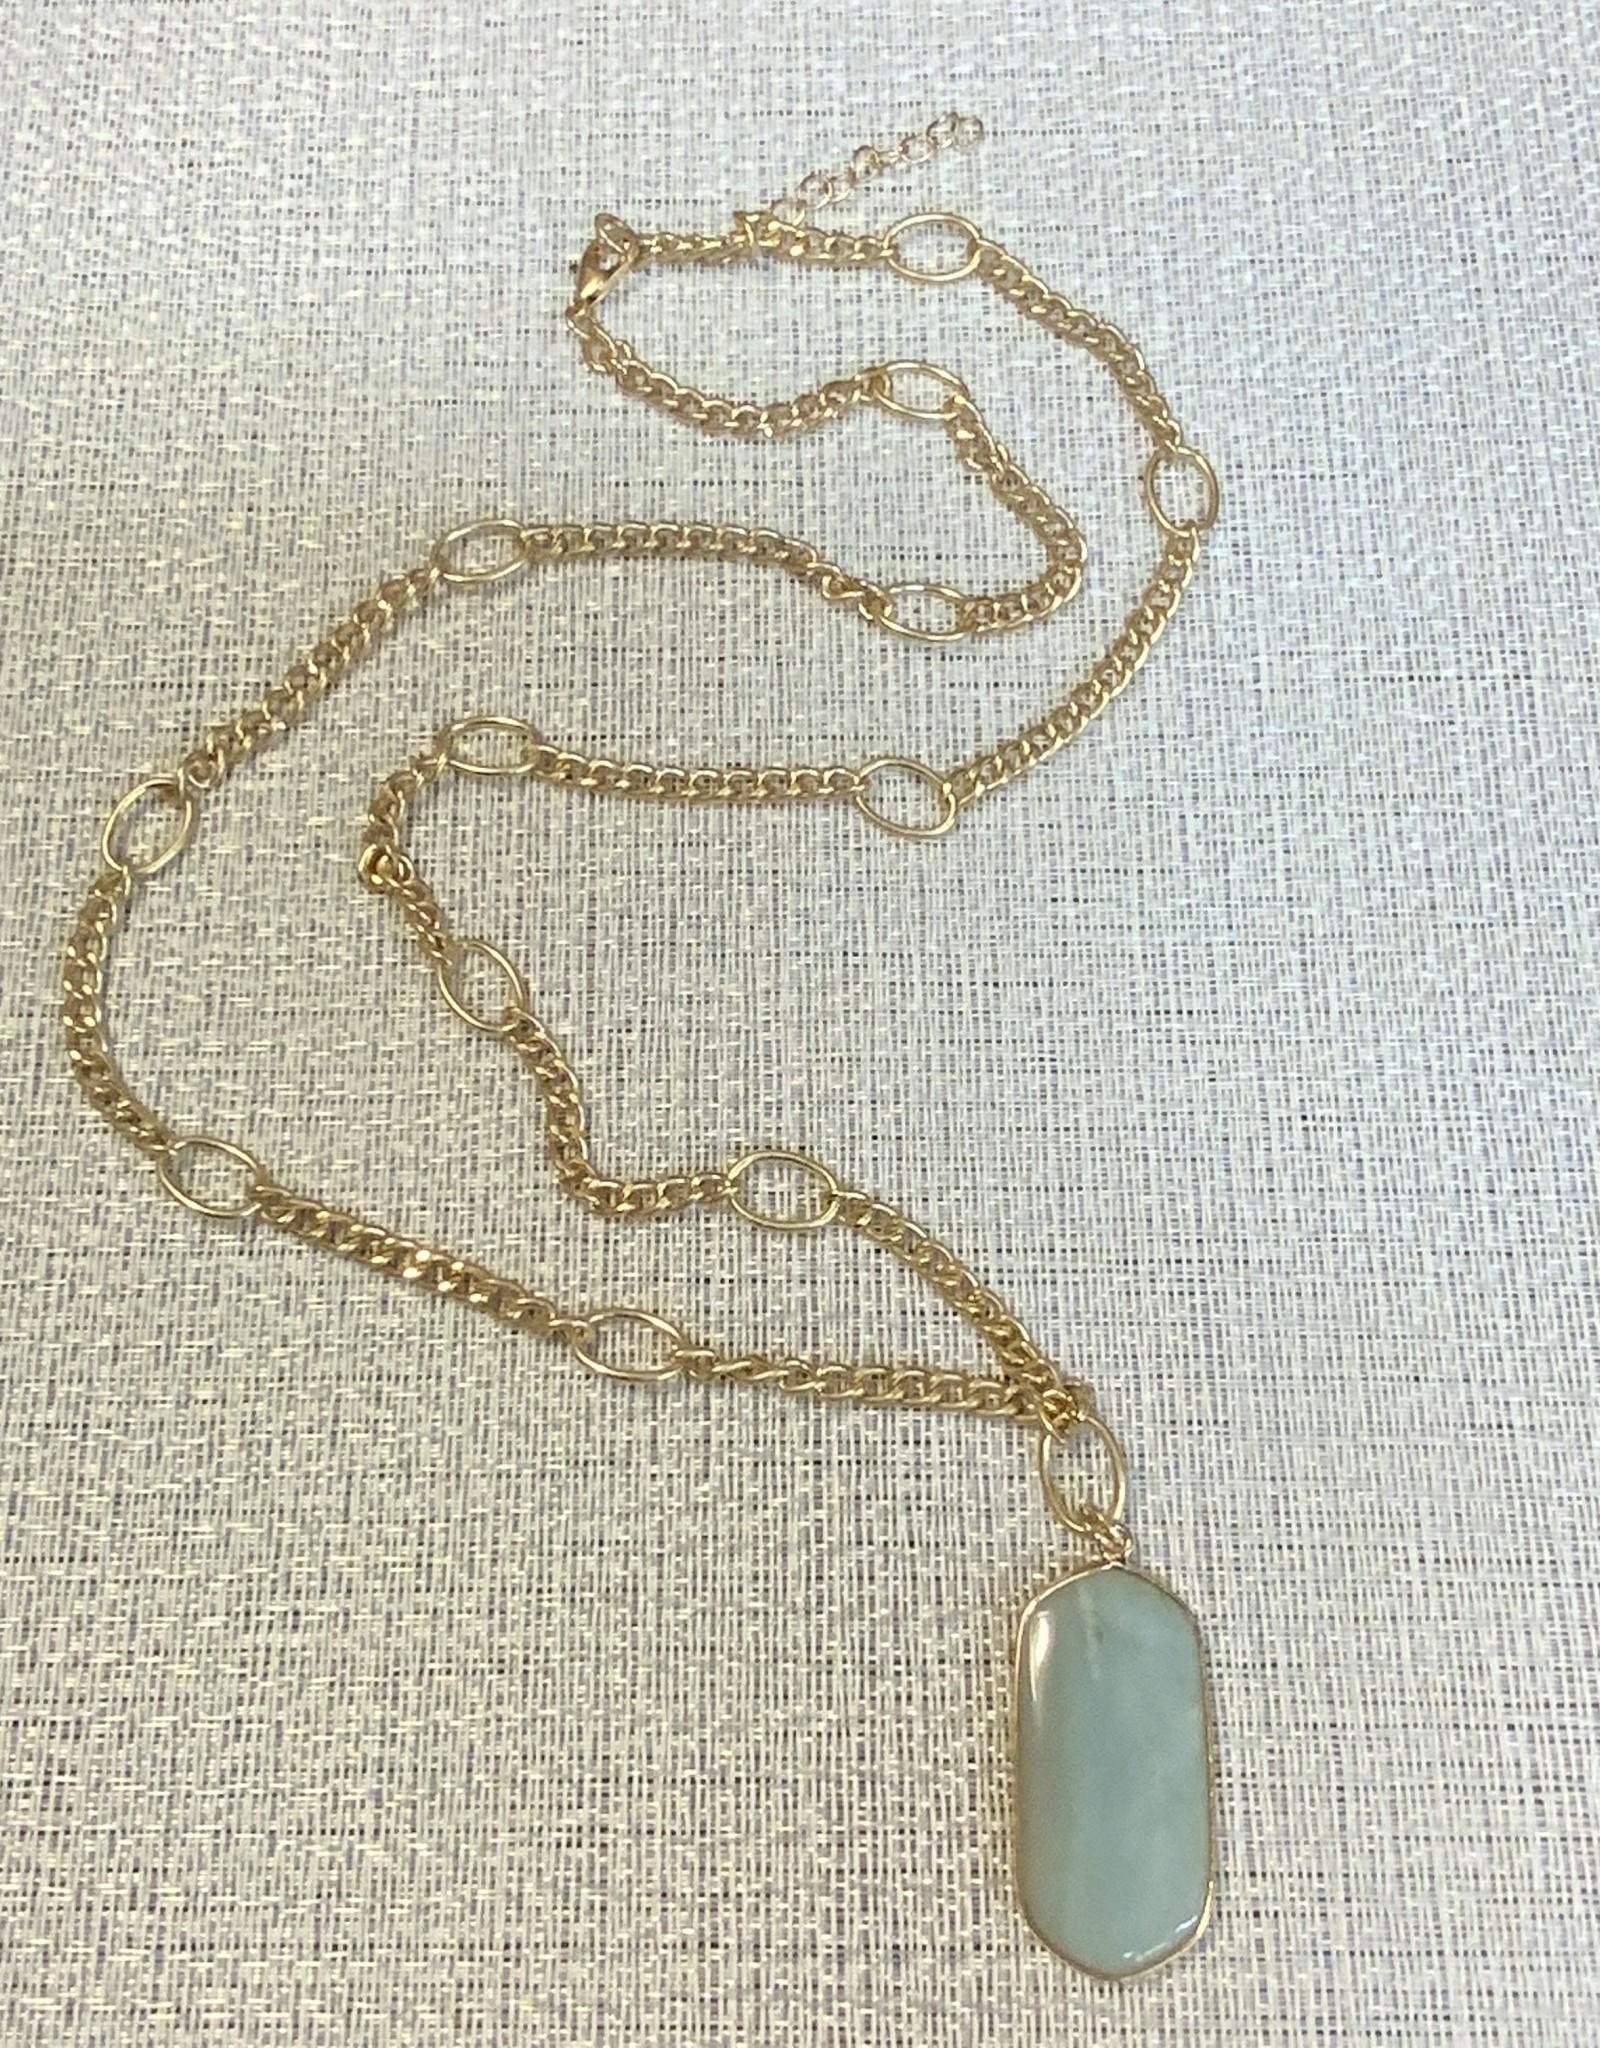 Gold Chain w/Ovals & Stone Pendant Necklace